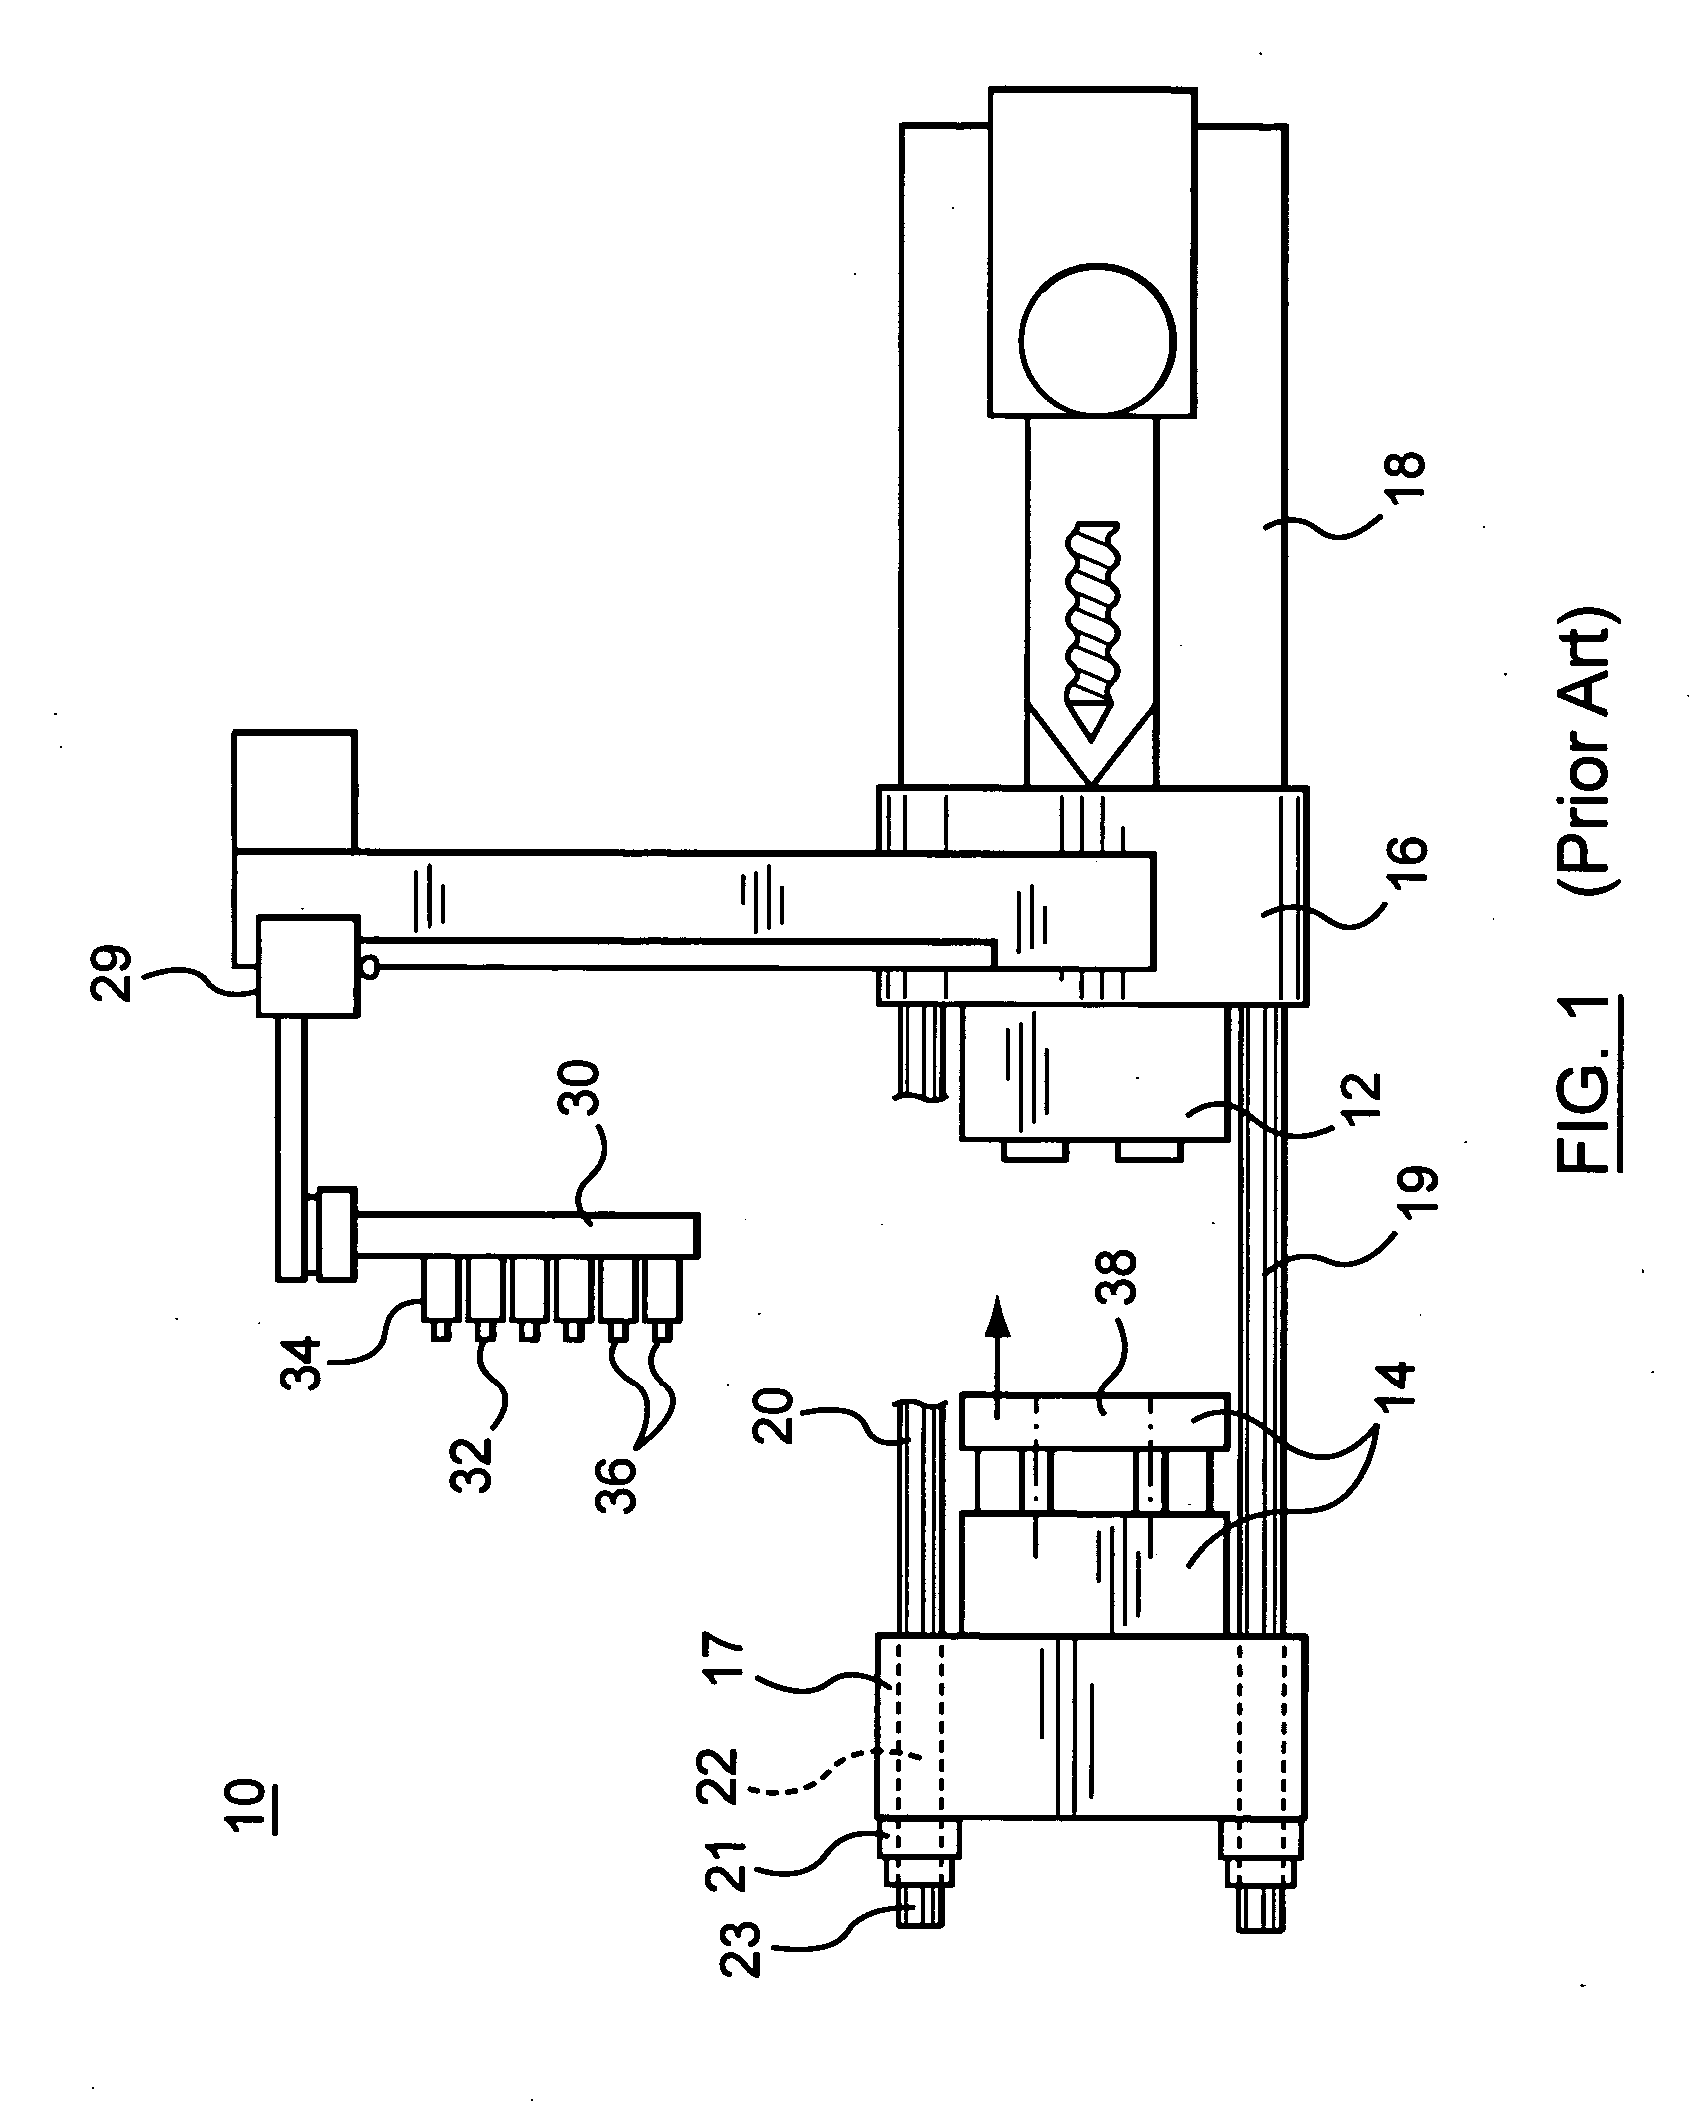 Molding machine and locking mechanism for securing tie bars